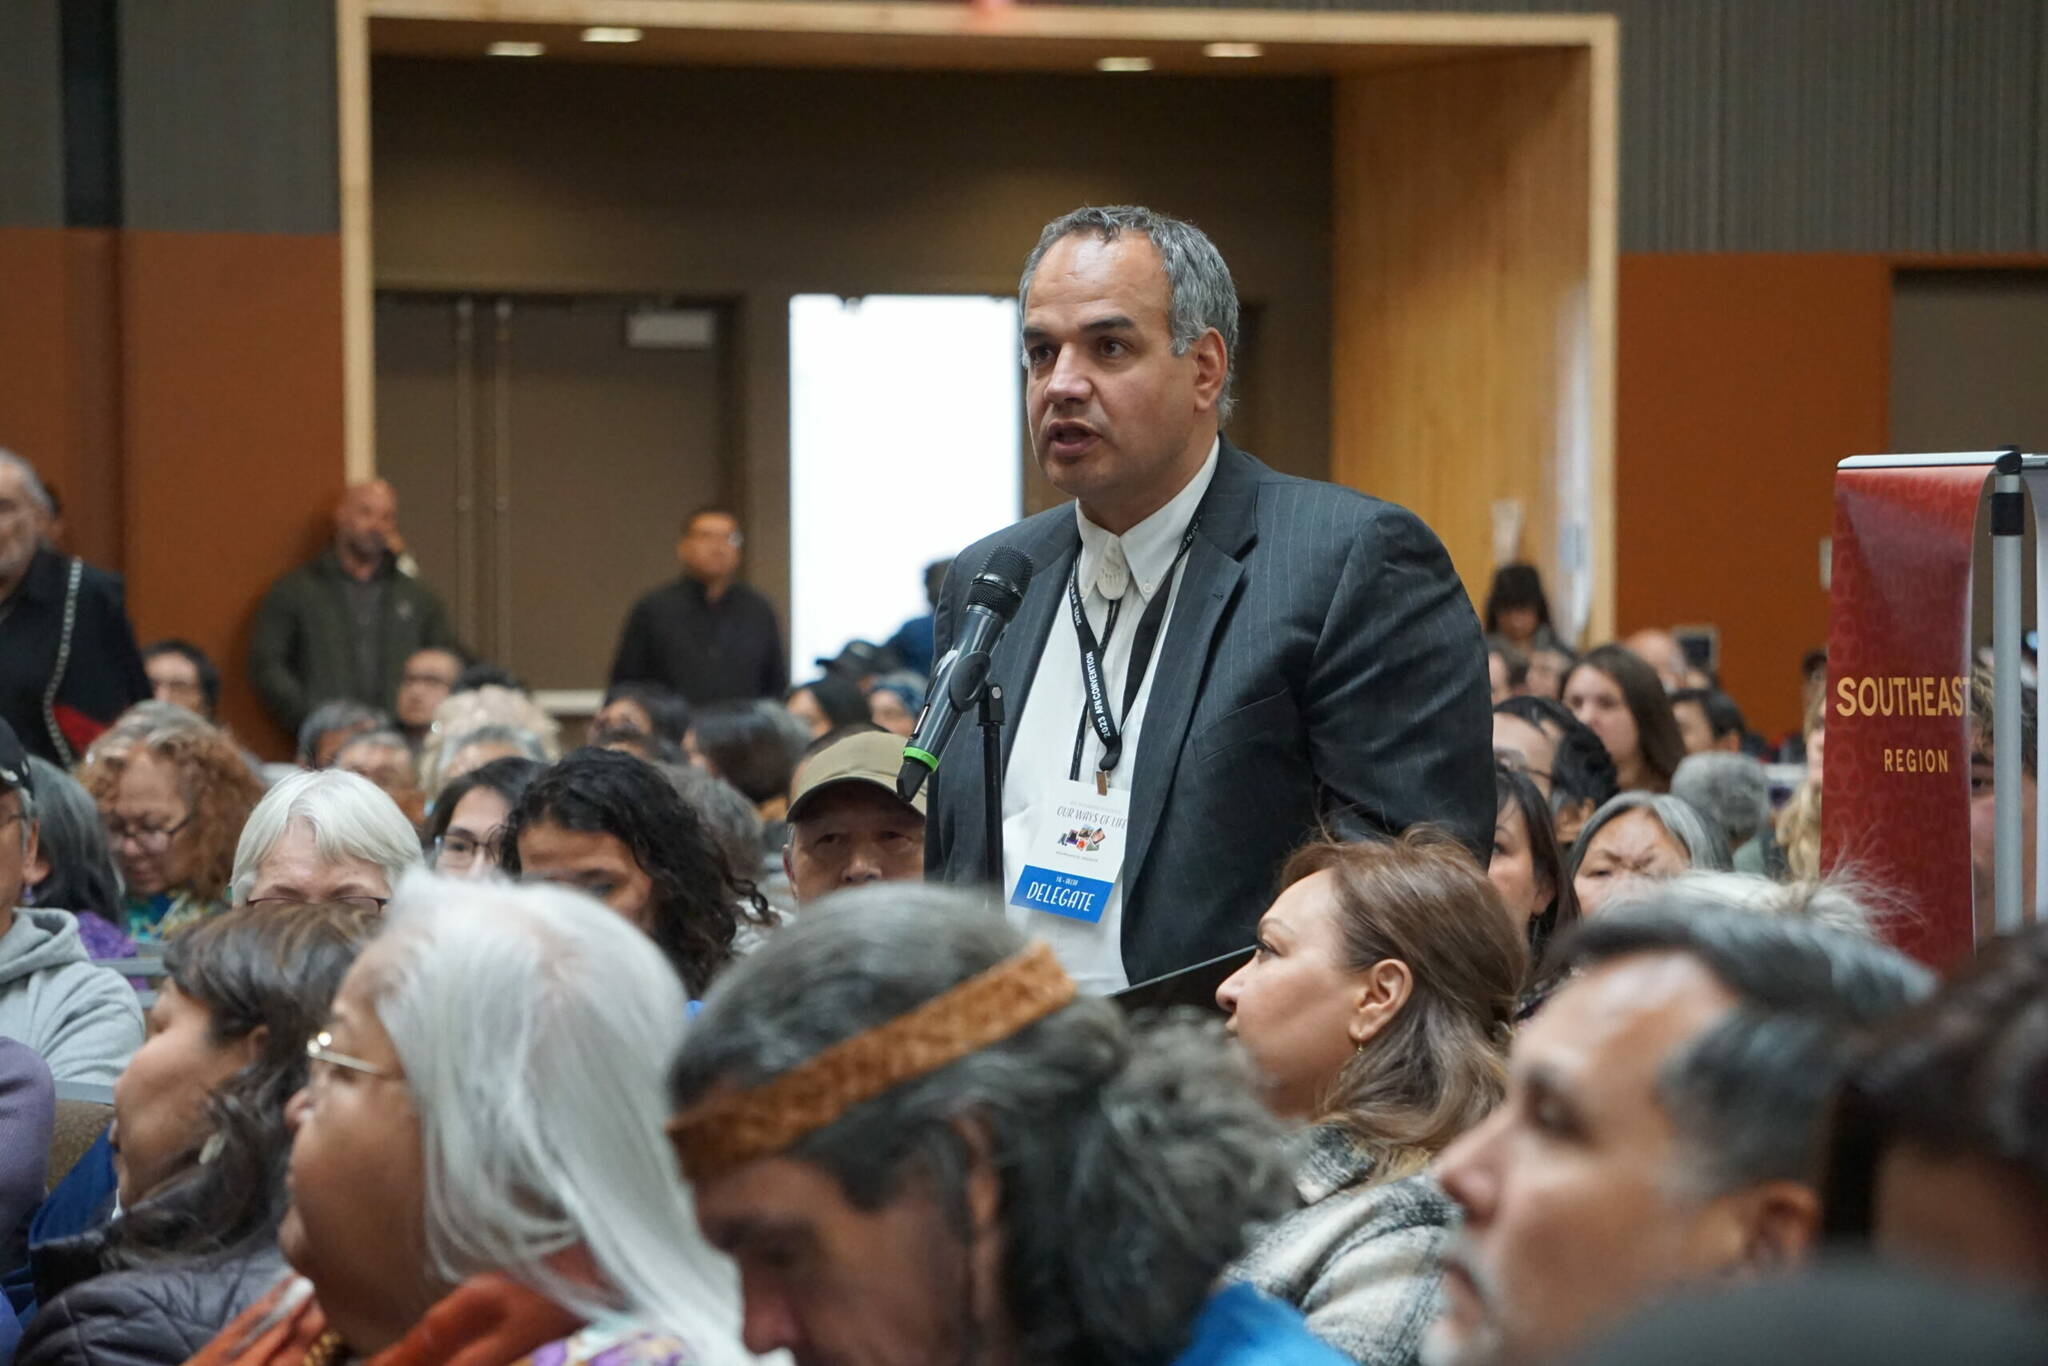 Curt Chamberlain, an attorney who grew up practicing subsistence fishing in Aniak, argues at Friday’s Alaska Federation of Natives convention for changes to federal law to protect Native subsistence harvests. Chamberlain was one of the speakers participating in a floor session on the subject. (Photo by Yereth Rosen/Alaska Beacon)